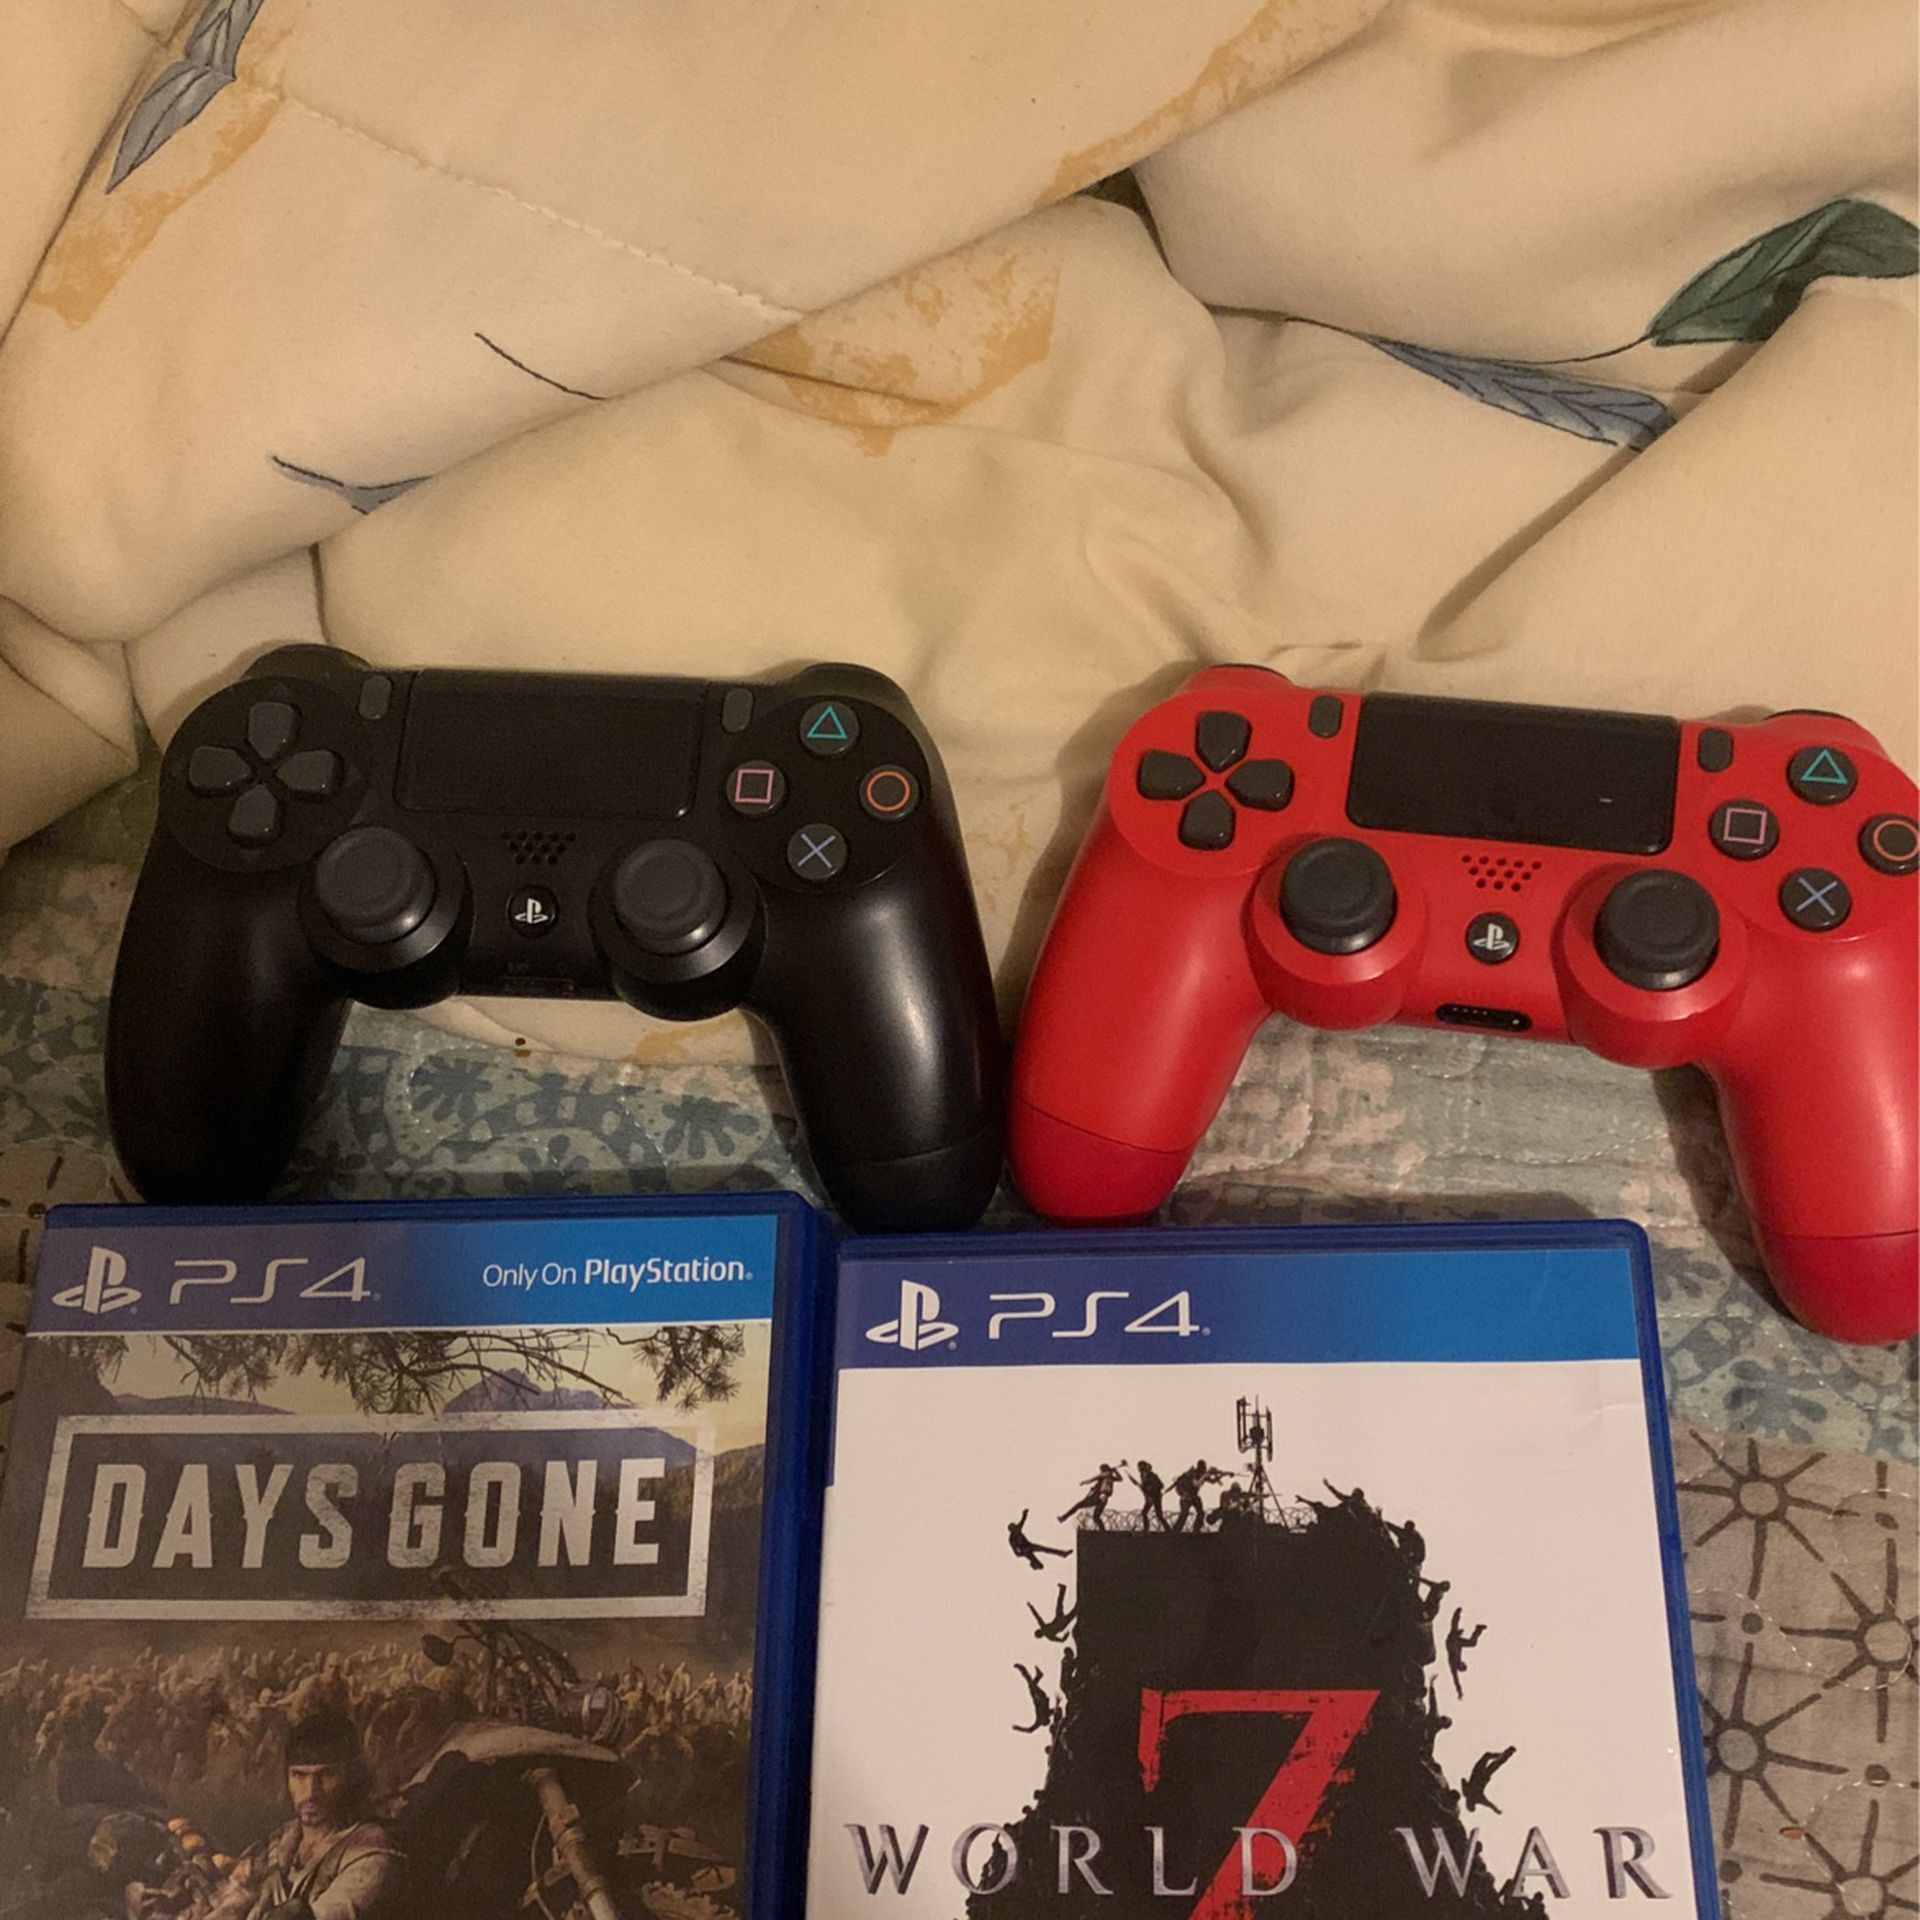 PS4 Slim With 4 Games And Two Controllers for Sale in Wellford, SC 